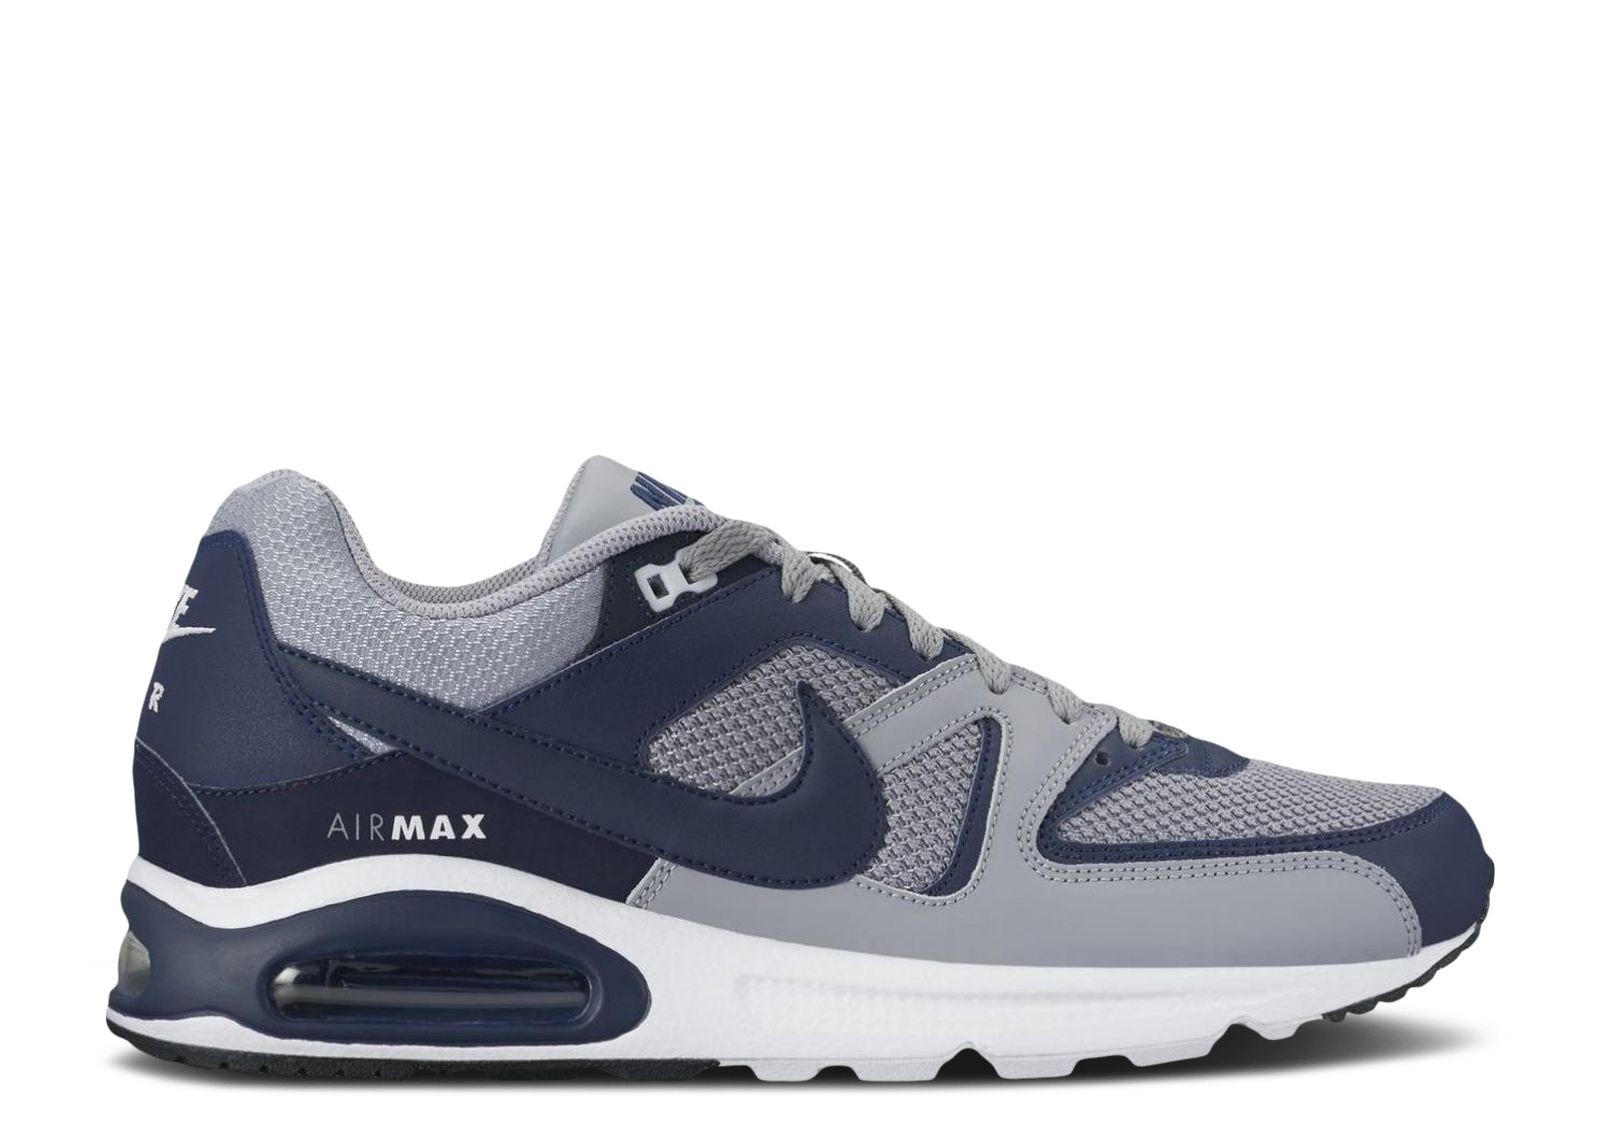 Air Max Command 'Stealth Midnight Navy' - Nike - 629993 - stealth/midnight navy/white Club